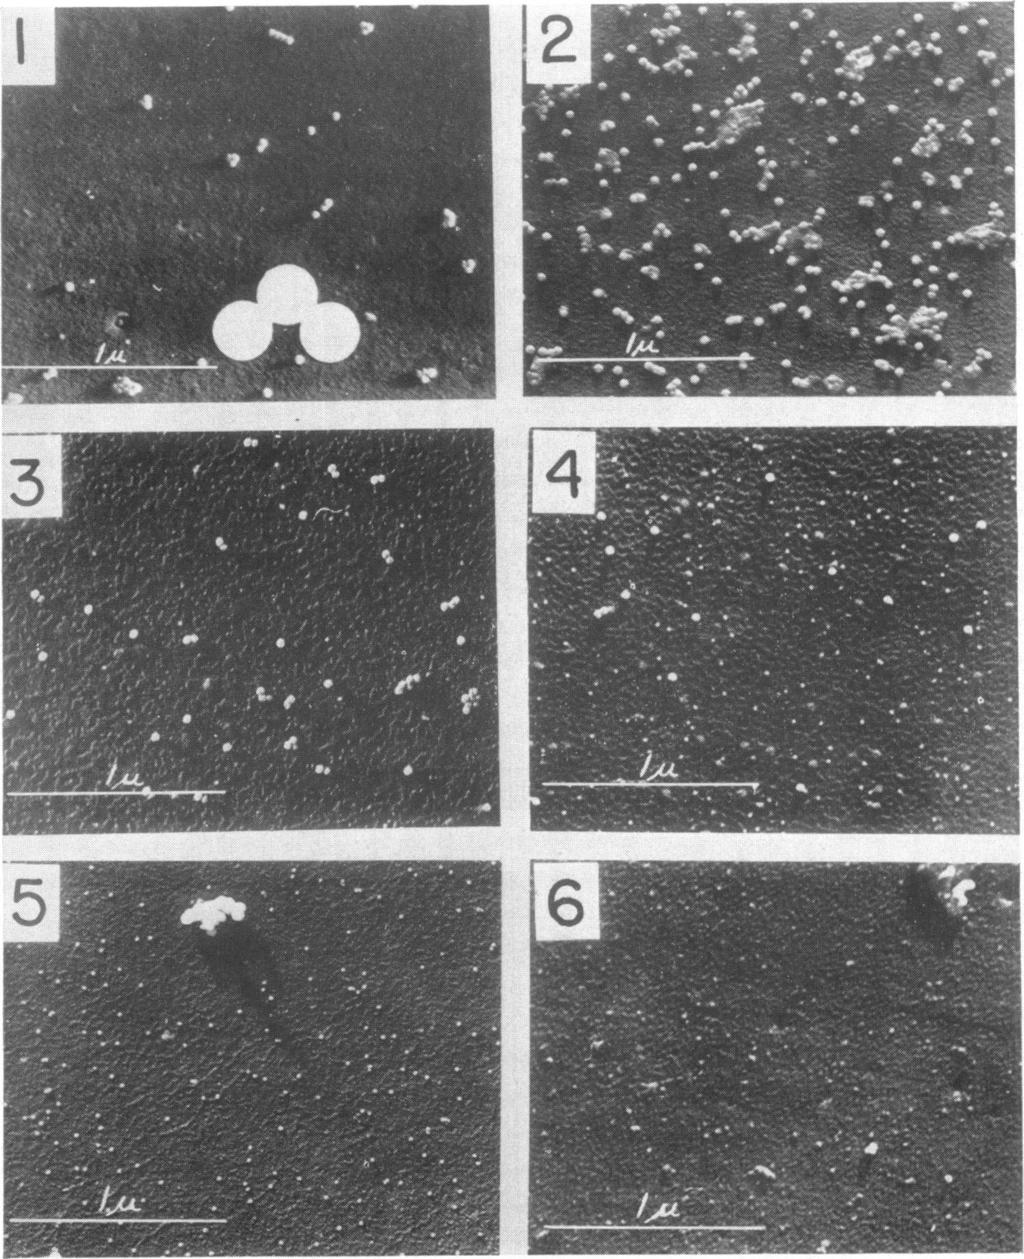 242 BRIEFS, BREESE, JR., WARREN, AND HUEBNER [VOL. 64 Downloaded from http://jb.asm.org/ Figure. 1. Coxsackie no. 93 prepared from amniotic fluid. Chromium shadowed. Dow latex balls added. Figure 2.